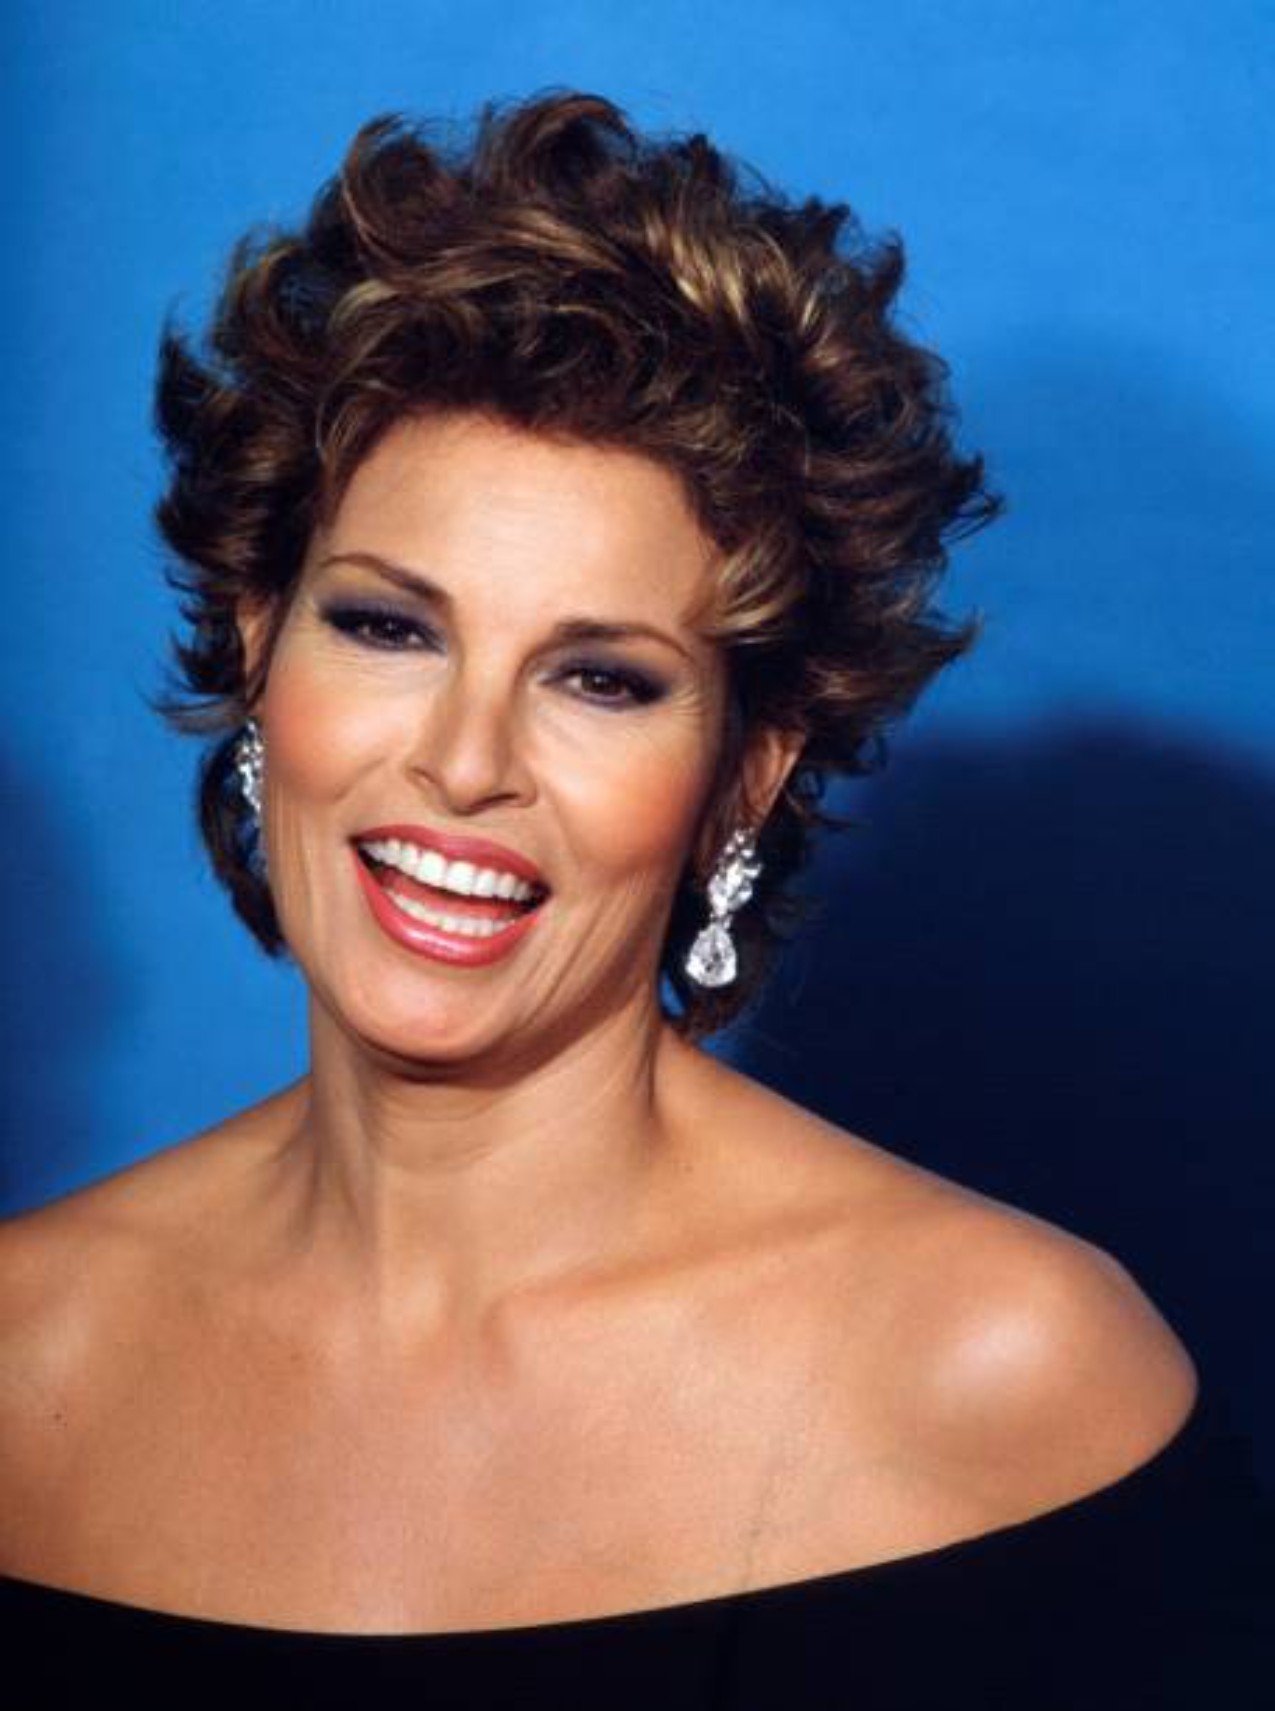 gettyimages 1391651630 612x612 1 1 Raquel Welch, Entertainer and Hollywood Hot and Sexy Actress, Dead at 82